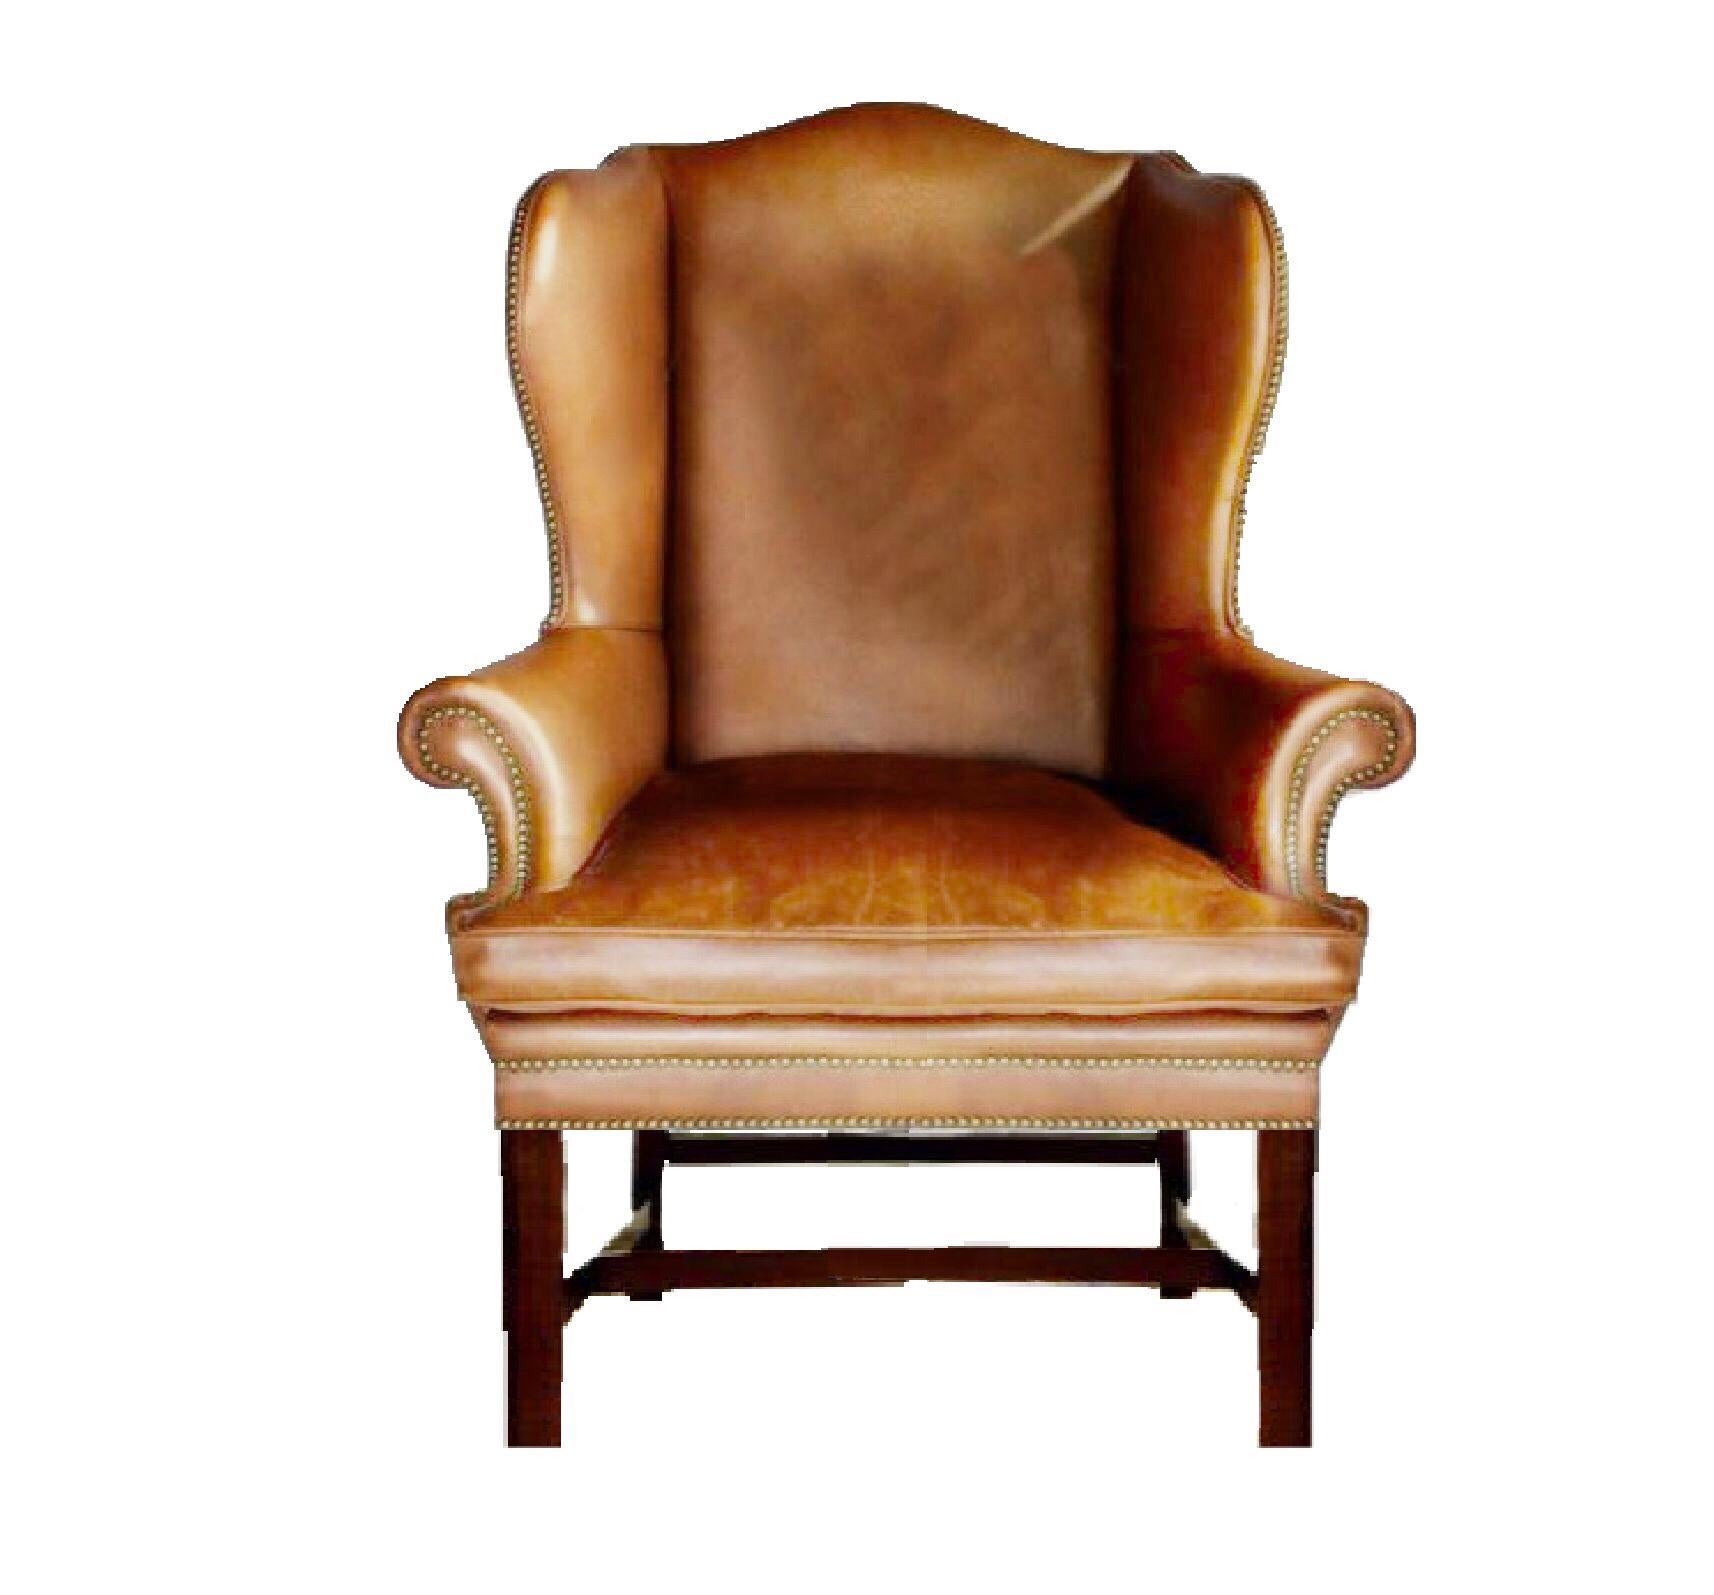 Glorious and aged to perfection, early (possibly 1st generation, late 1970s) Ralph Lauren Wingback chair is the epitome of grounded, American luxury — as inviting, enveloping, unforced and timeless as it is luxurious, meticulously handcrafted and